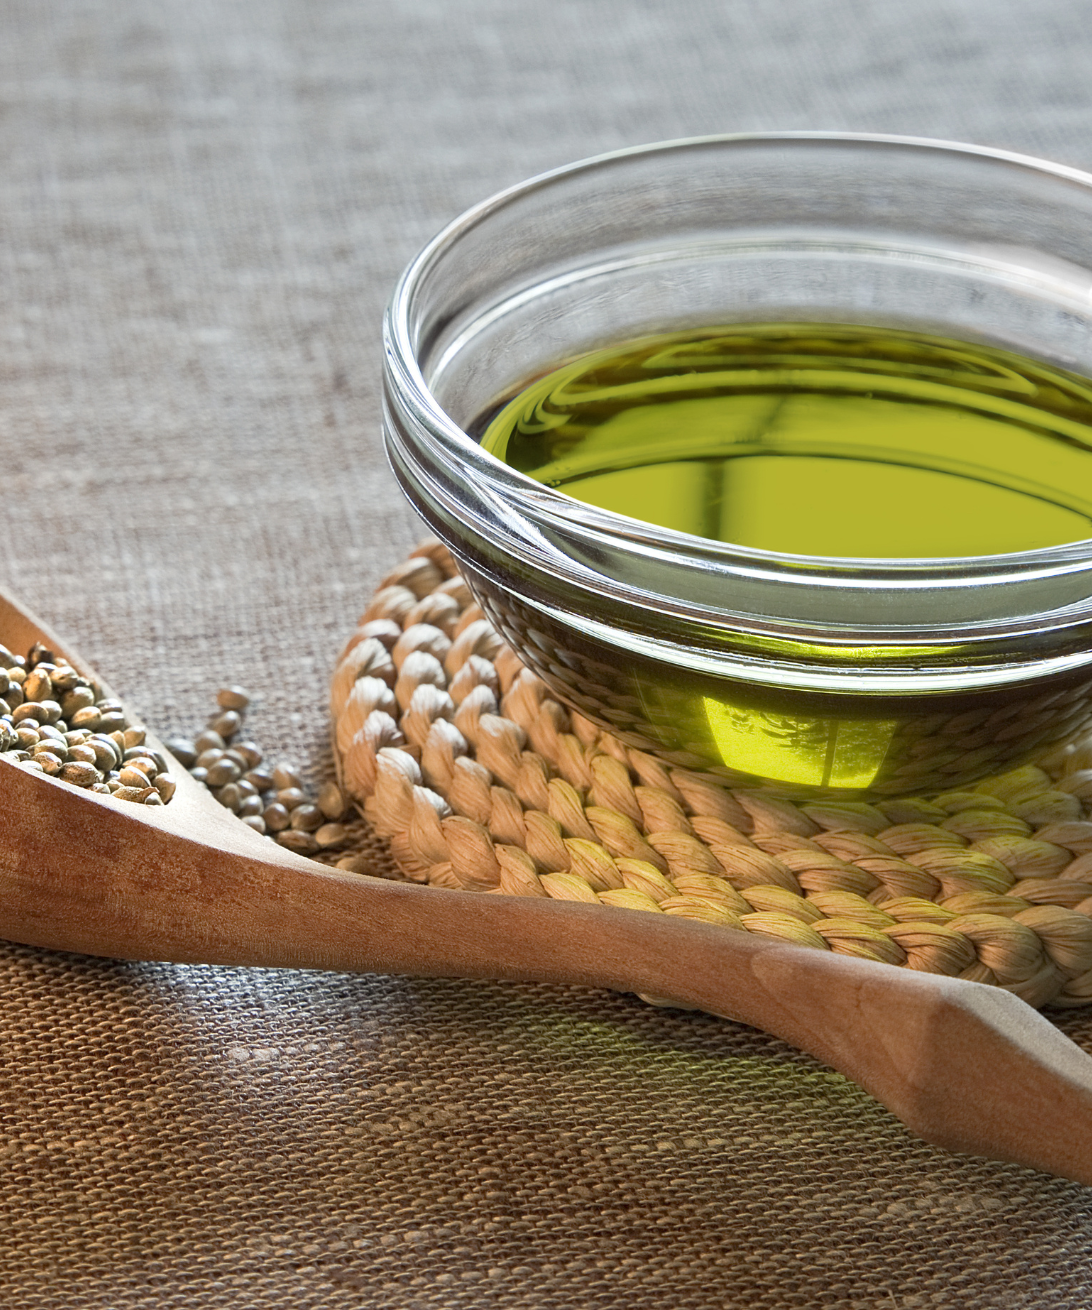 What are the Benefits of Using Organic Hemp Oil?